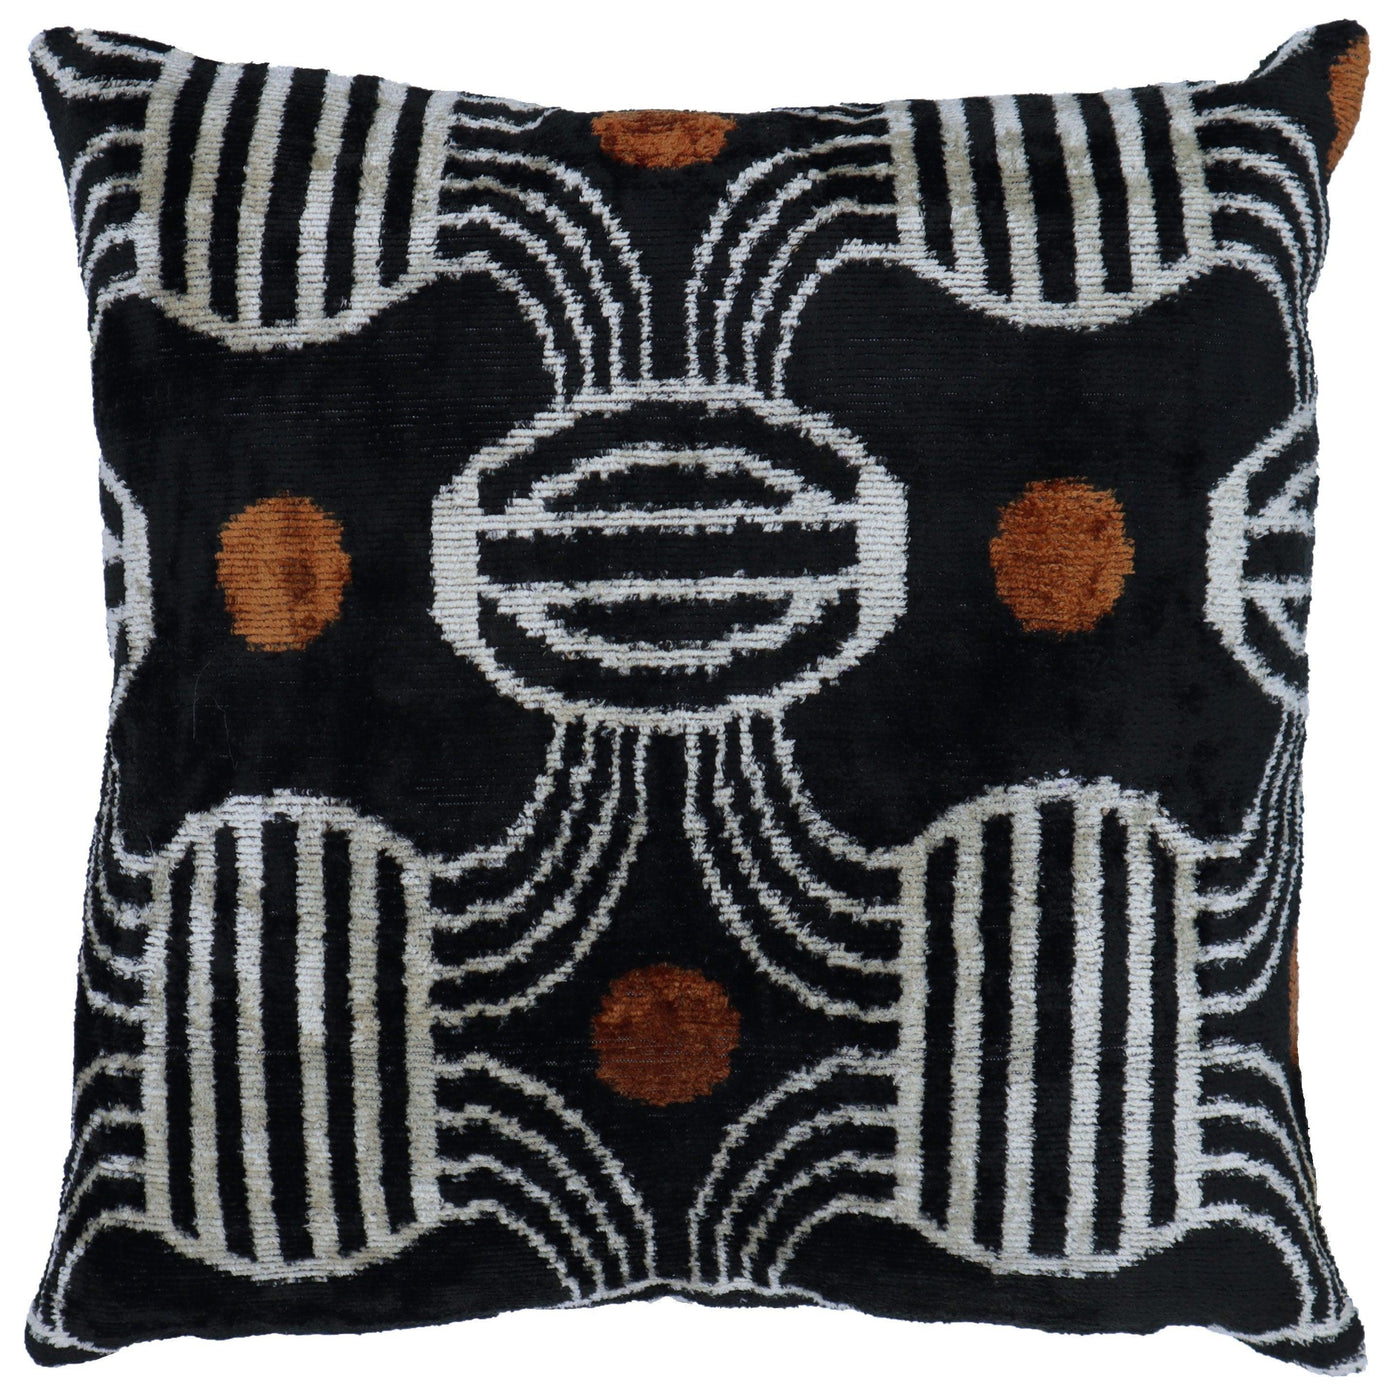 Canvello Soft Black And White Pillows For Couch | 16 x 16 in (40 x 40 cm)